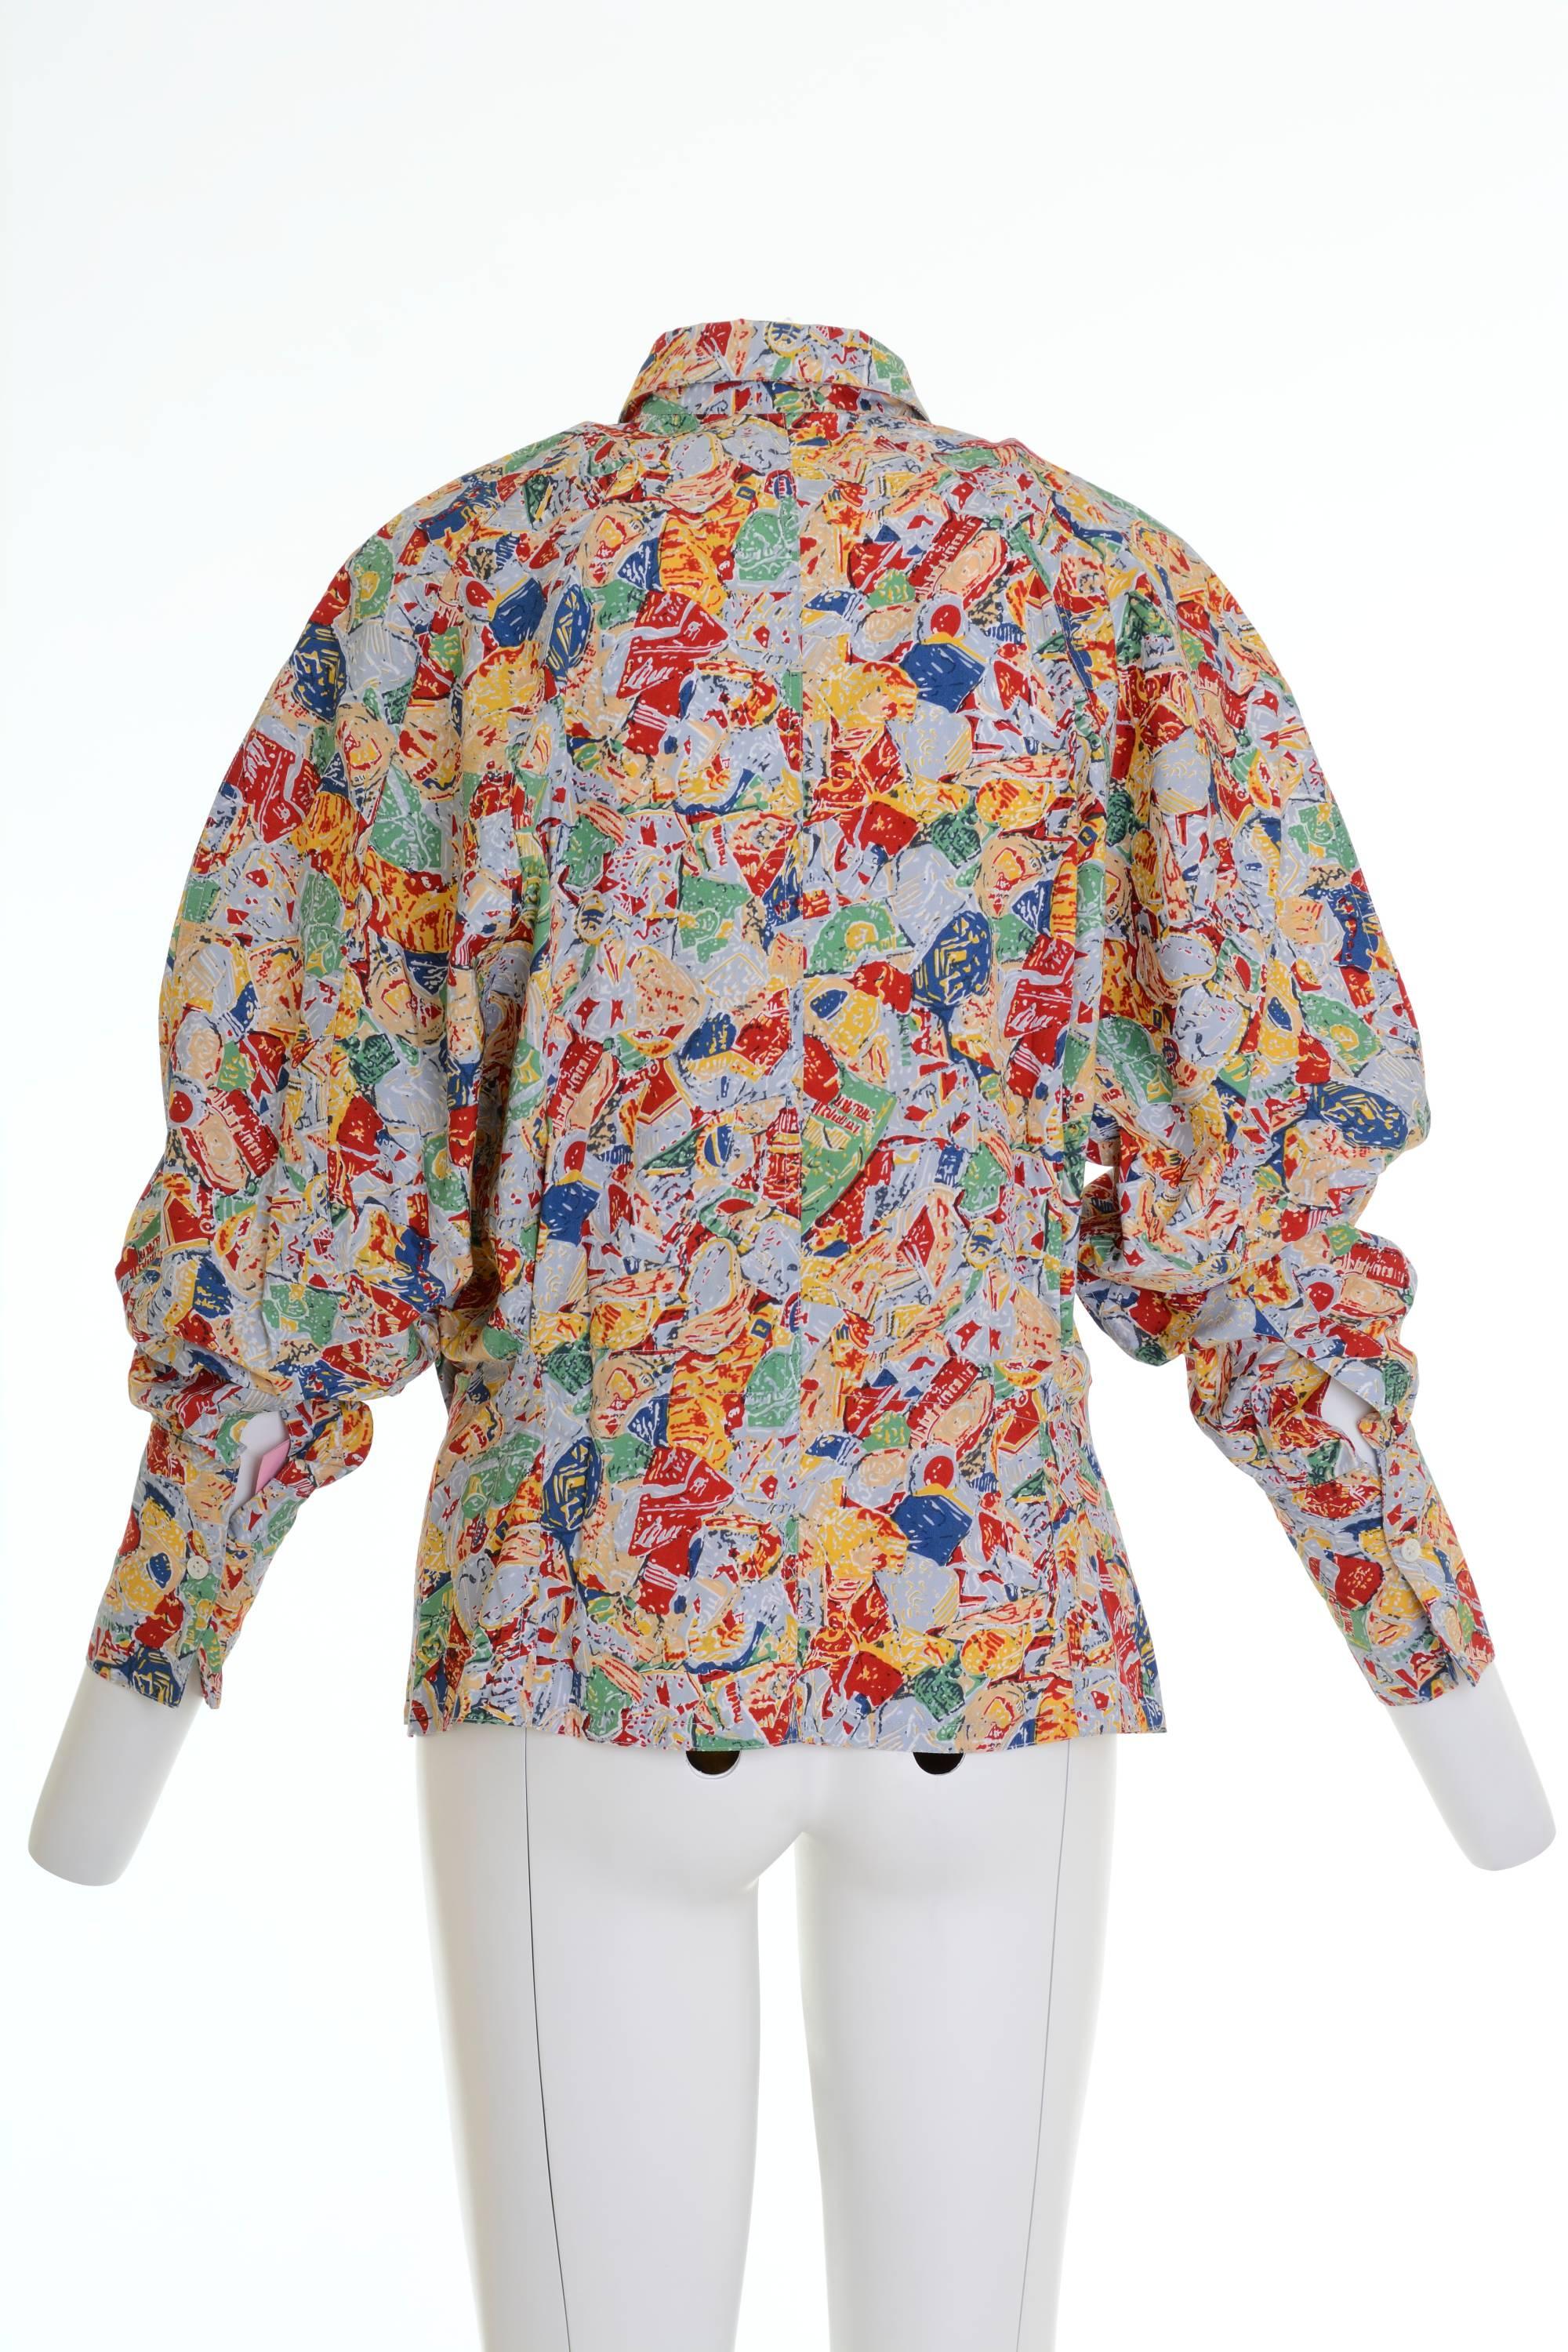 This rare and amazing 1980s Azzedine Alana shirt is in a colorful abstract print cotton fabric. It has oversize line, large cuff sleeves, hidden buttons closure and inside grosgrain waistband.

Excellent vintage condition

Label: Alaïa-Paris (I